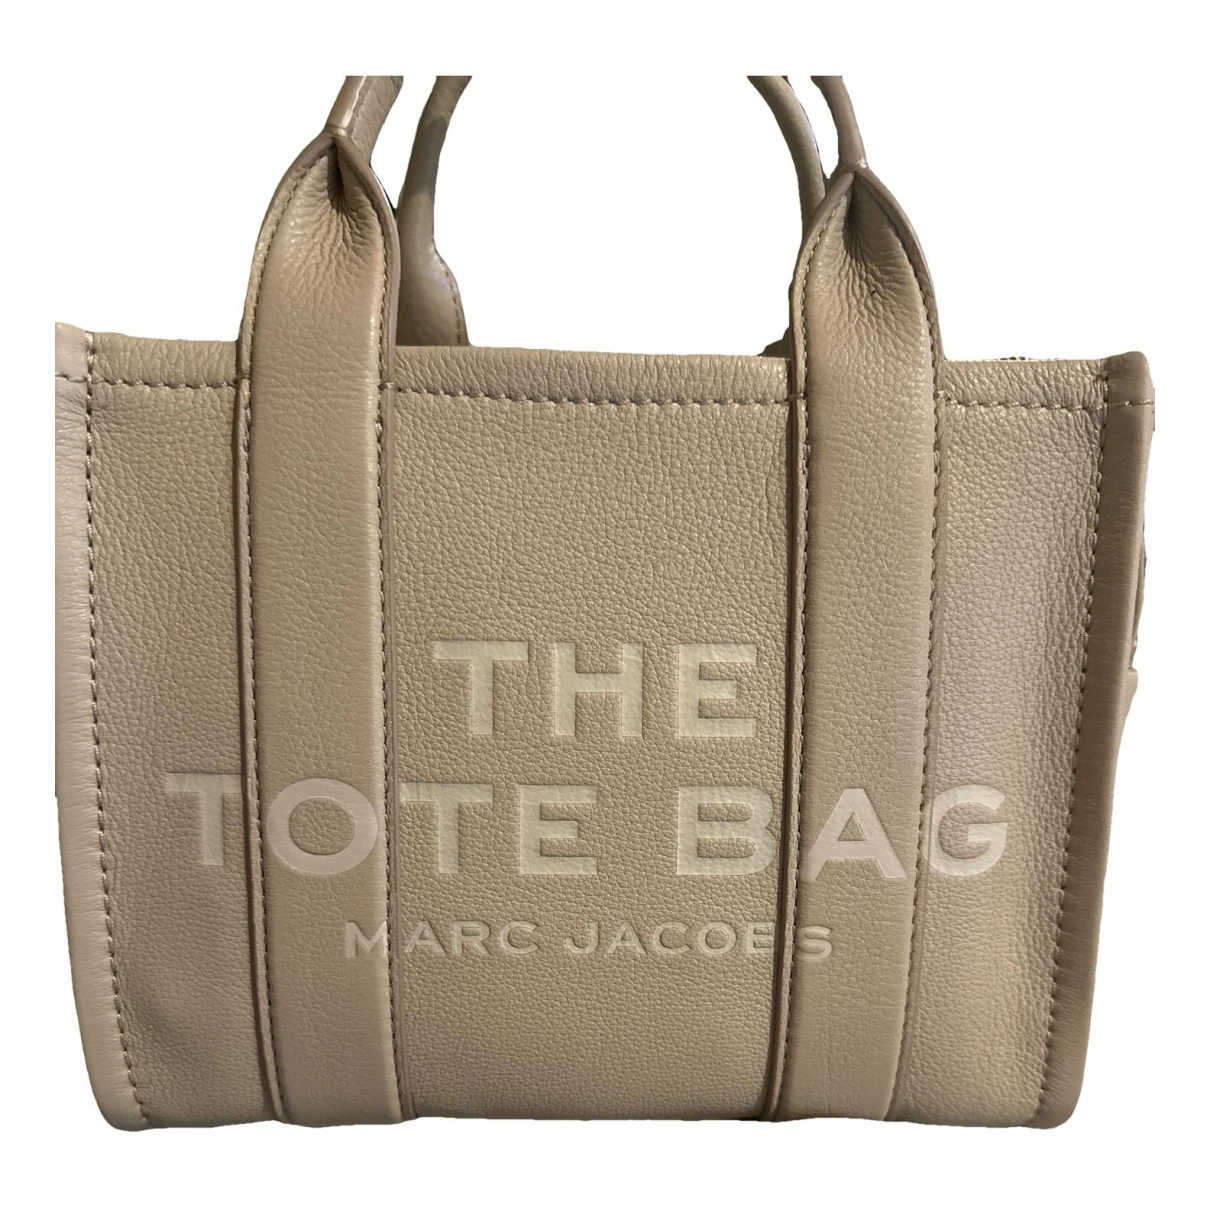 bags Marc Jacobs handbags The Tag Tote for Female Leather. Used condition